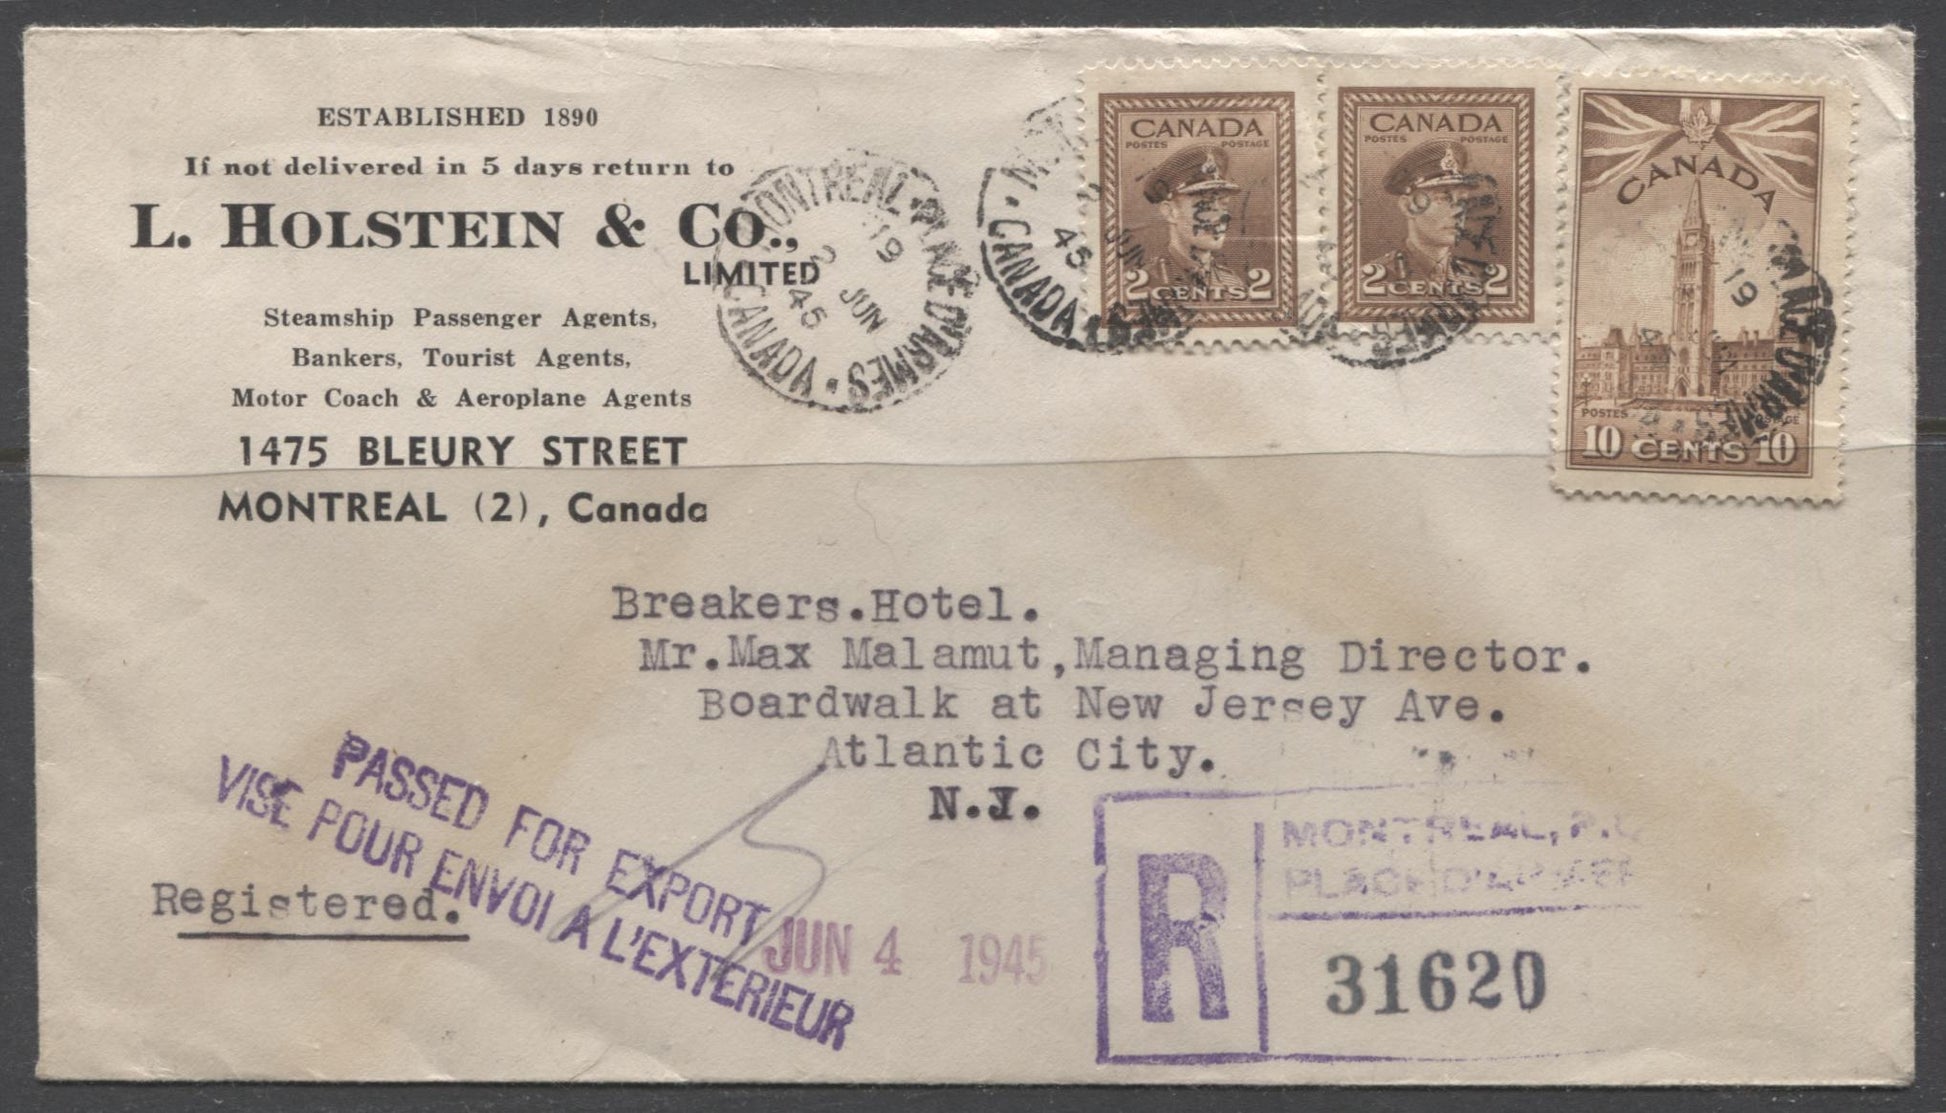 Canada #250, 257 1942-1949 War Issue, Registered "Passed For Export" to New Jersey Franked With 2 x 2c and 10c Stamps From The Series Brixton Chrome 